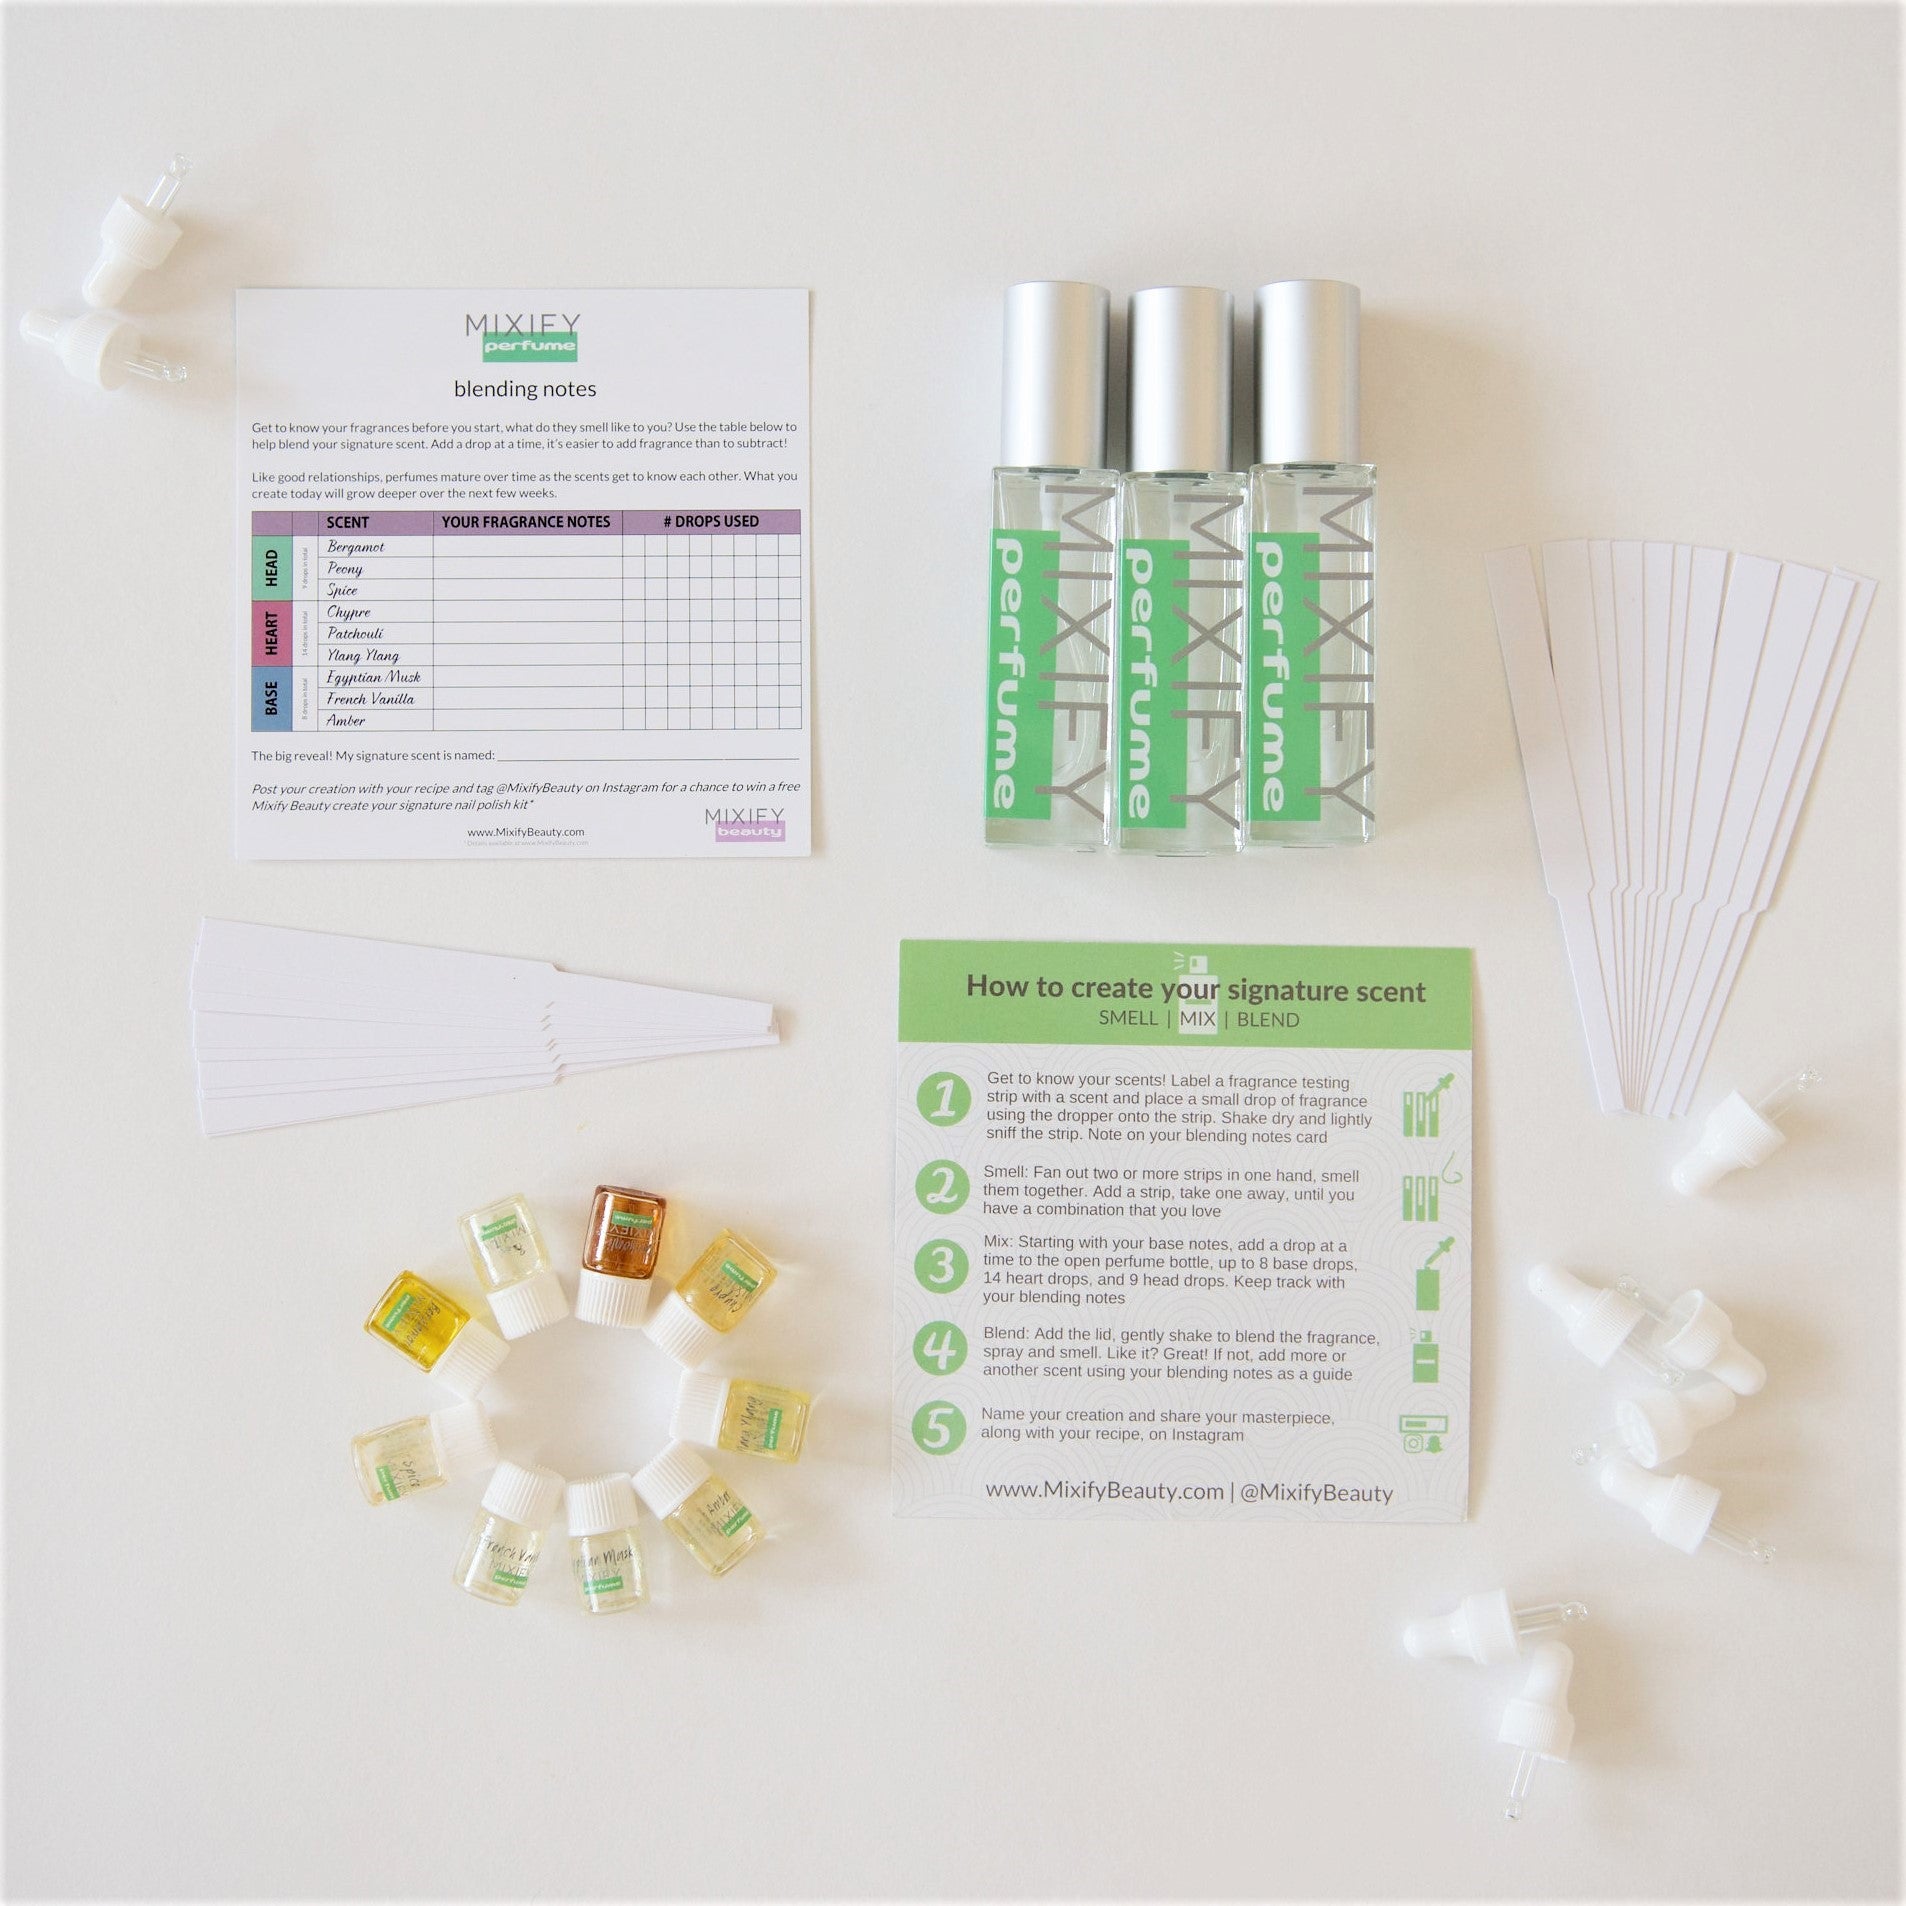 Mixify Beauty Brings the Art of Creating Your Own Personal Indie Scent to GBK's Oscars Gift Lounge